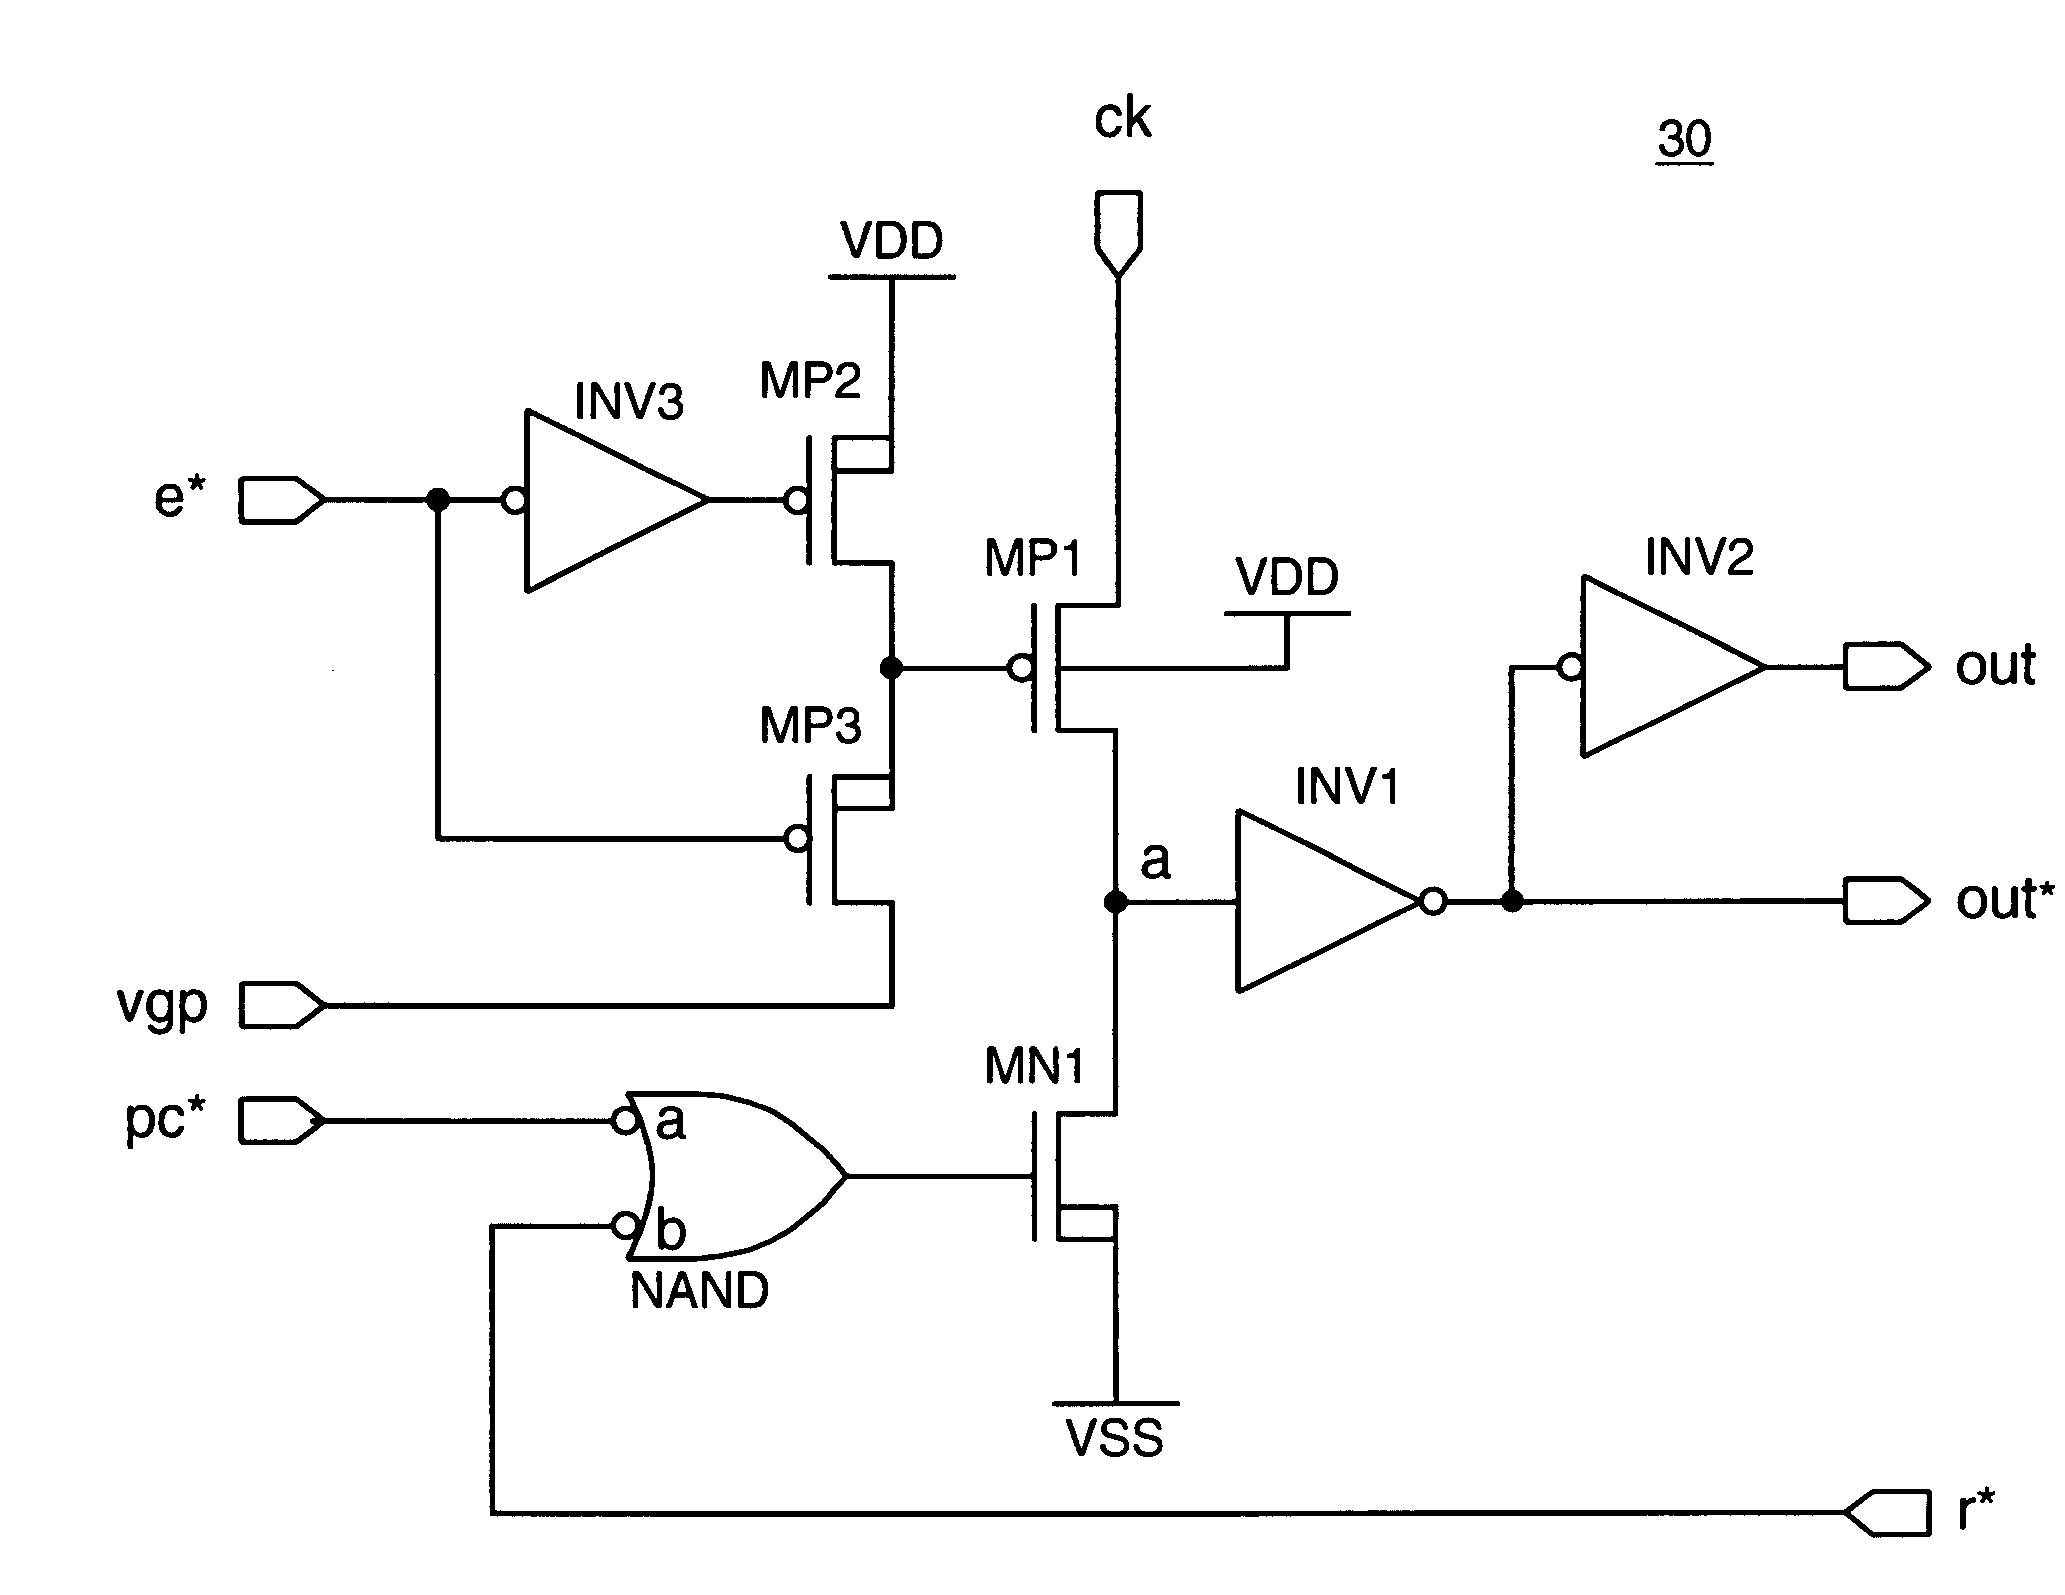 Shifter register for low power consumption application